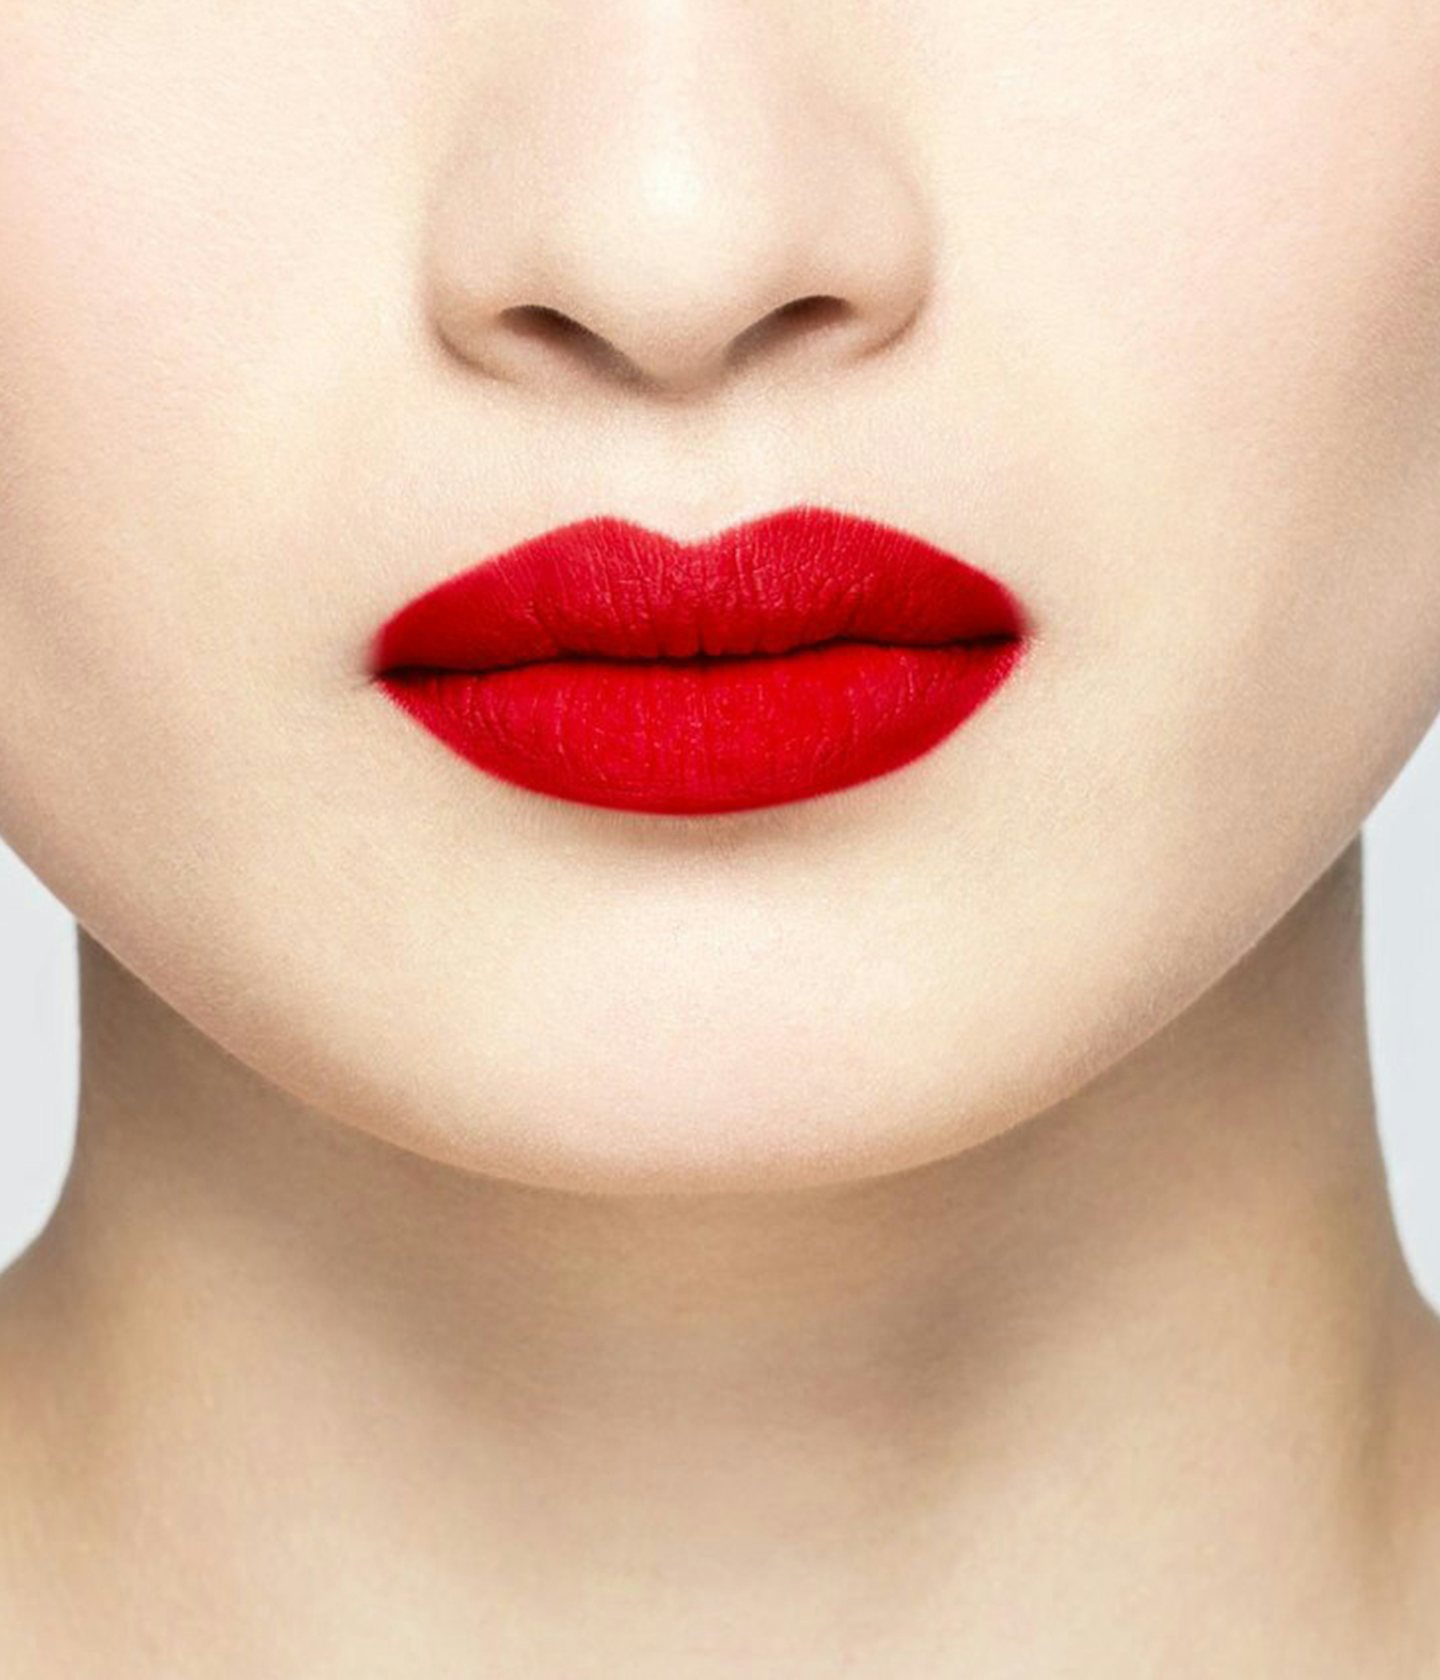 La bouche rouge Regal Red lipstick shade on the lips of an Asian model